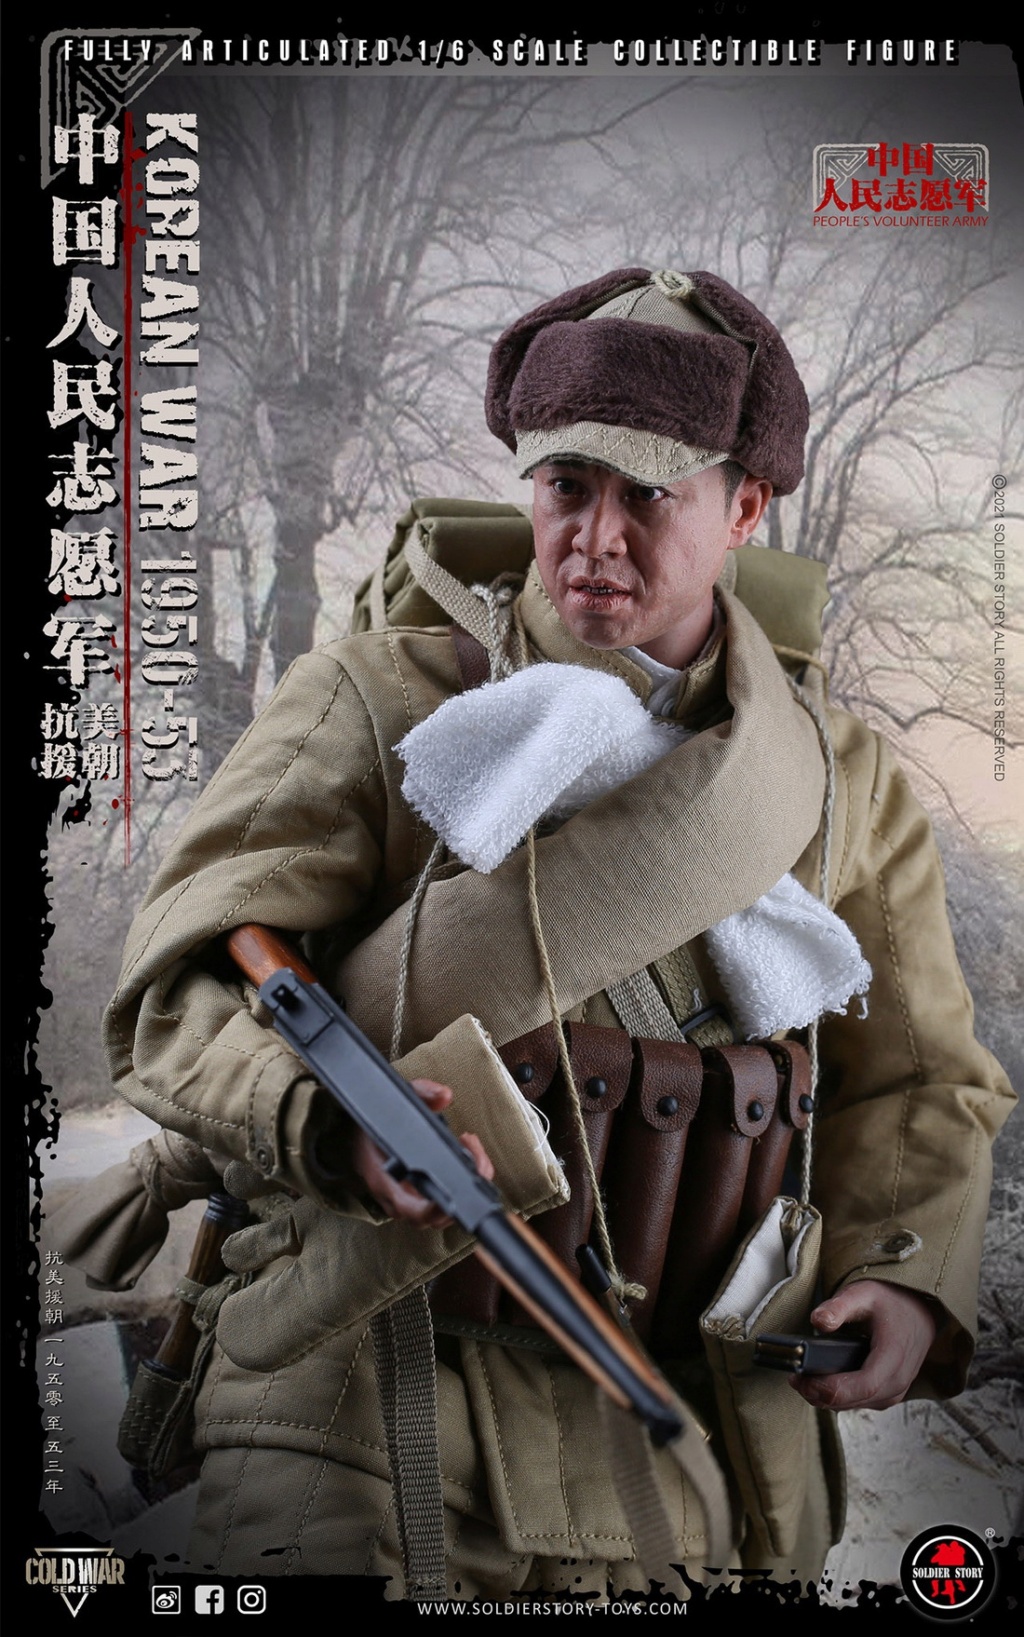 Soldierstory - NEW PRODUCT: SOLDIER STORY: 1/6 Chinese People’s Volunteers 1950-53 Collectible Action Figure (#SS-124) B6fbd810